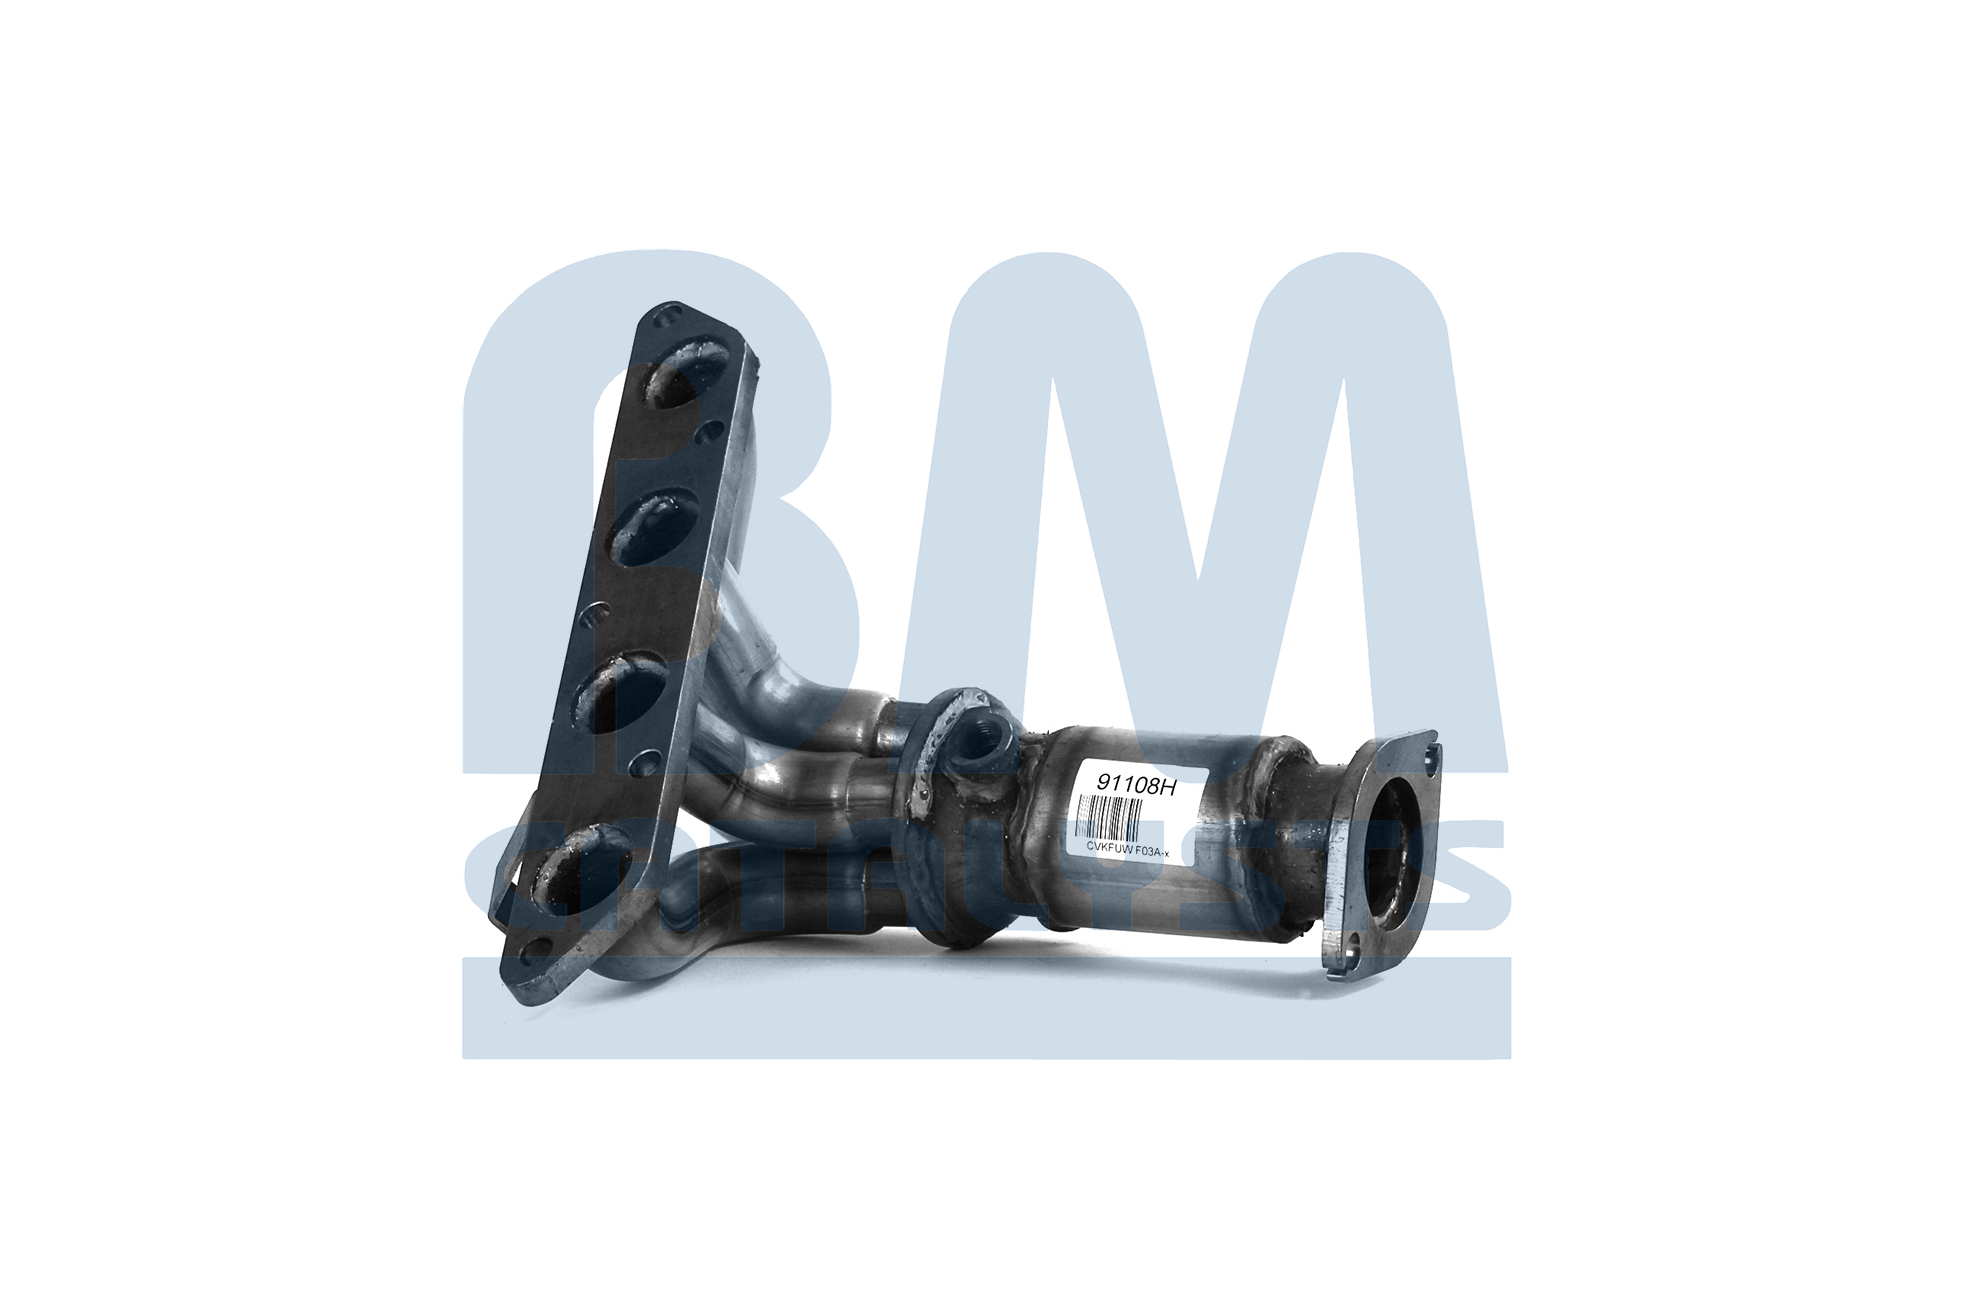 Approved Catalizzatore Bm Catalysts BM91208H 